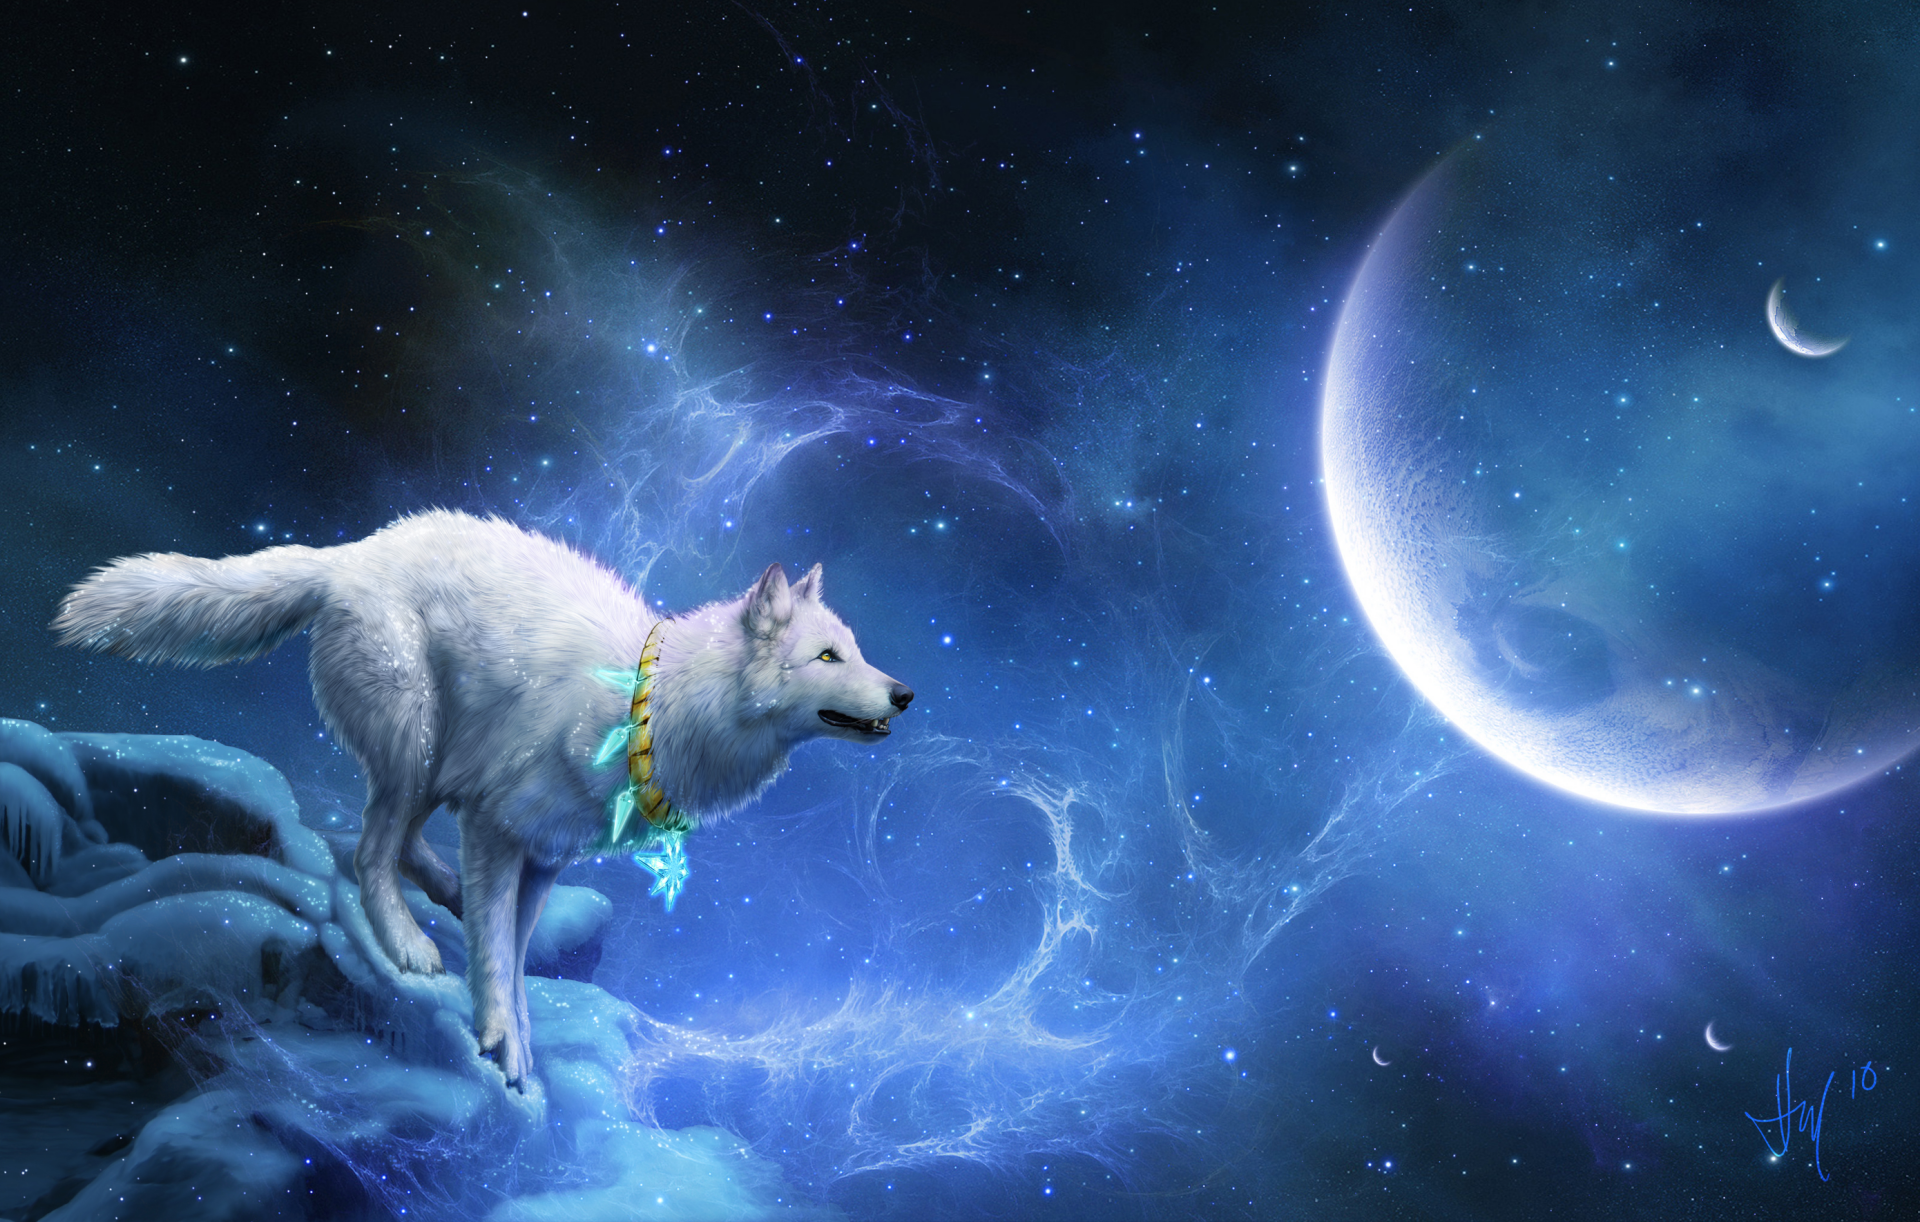 new moon wolf pack wallpaper